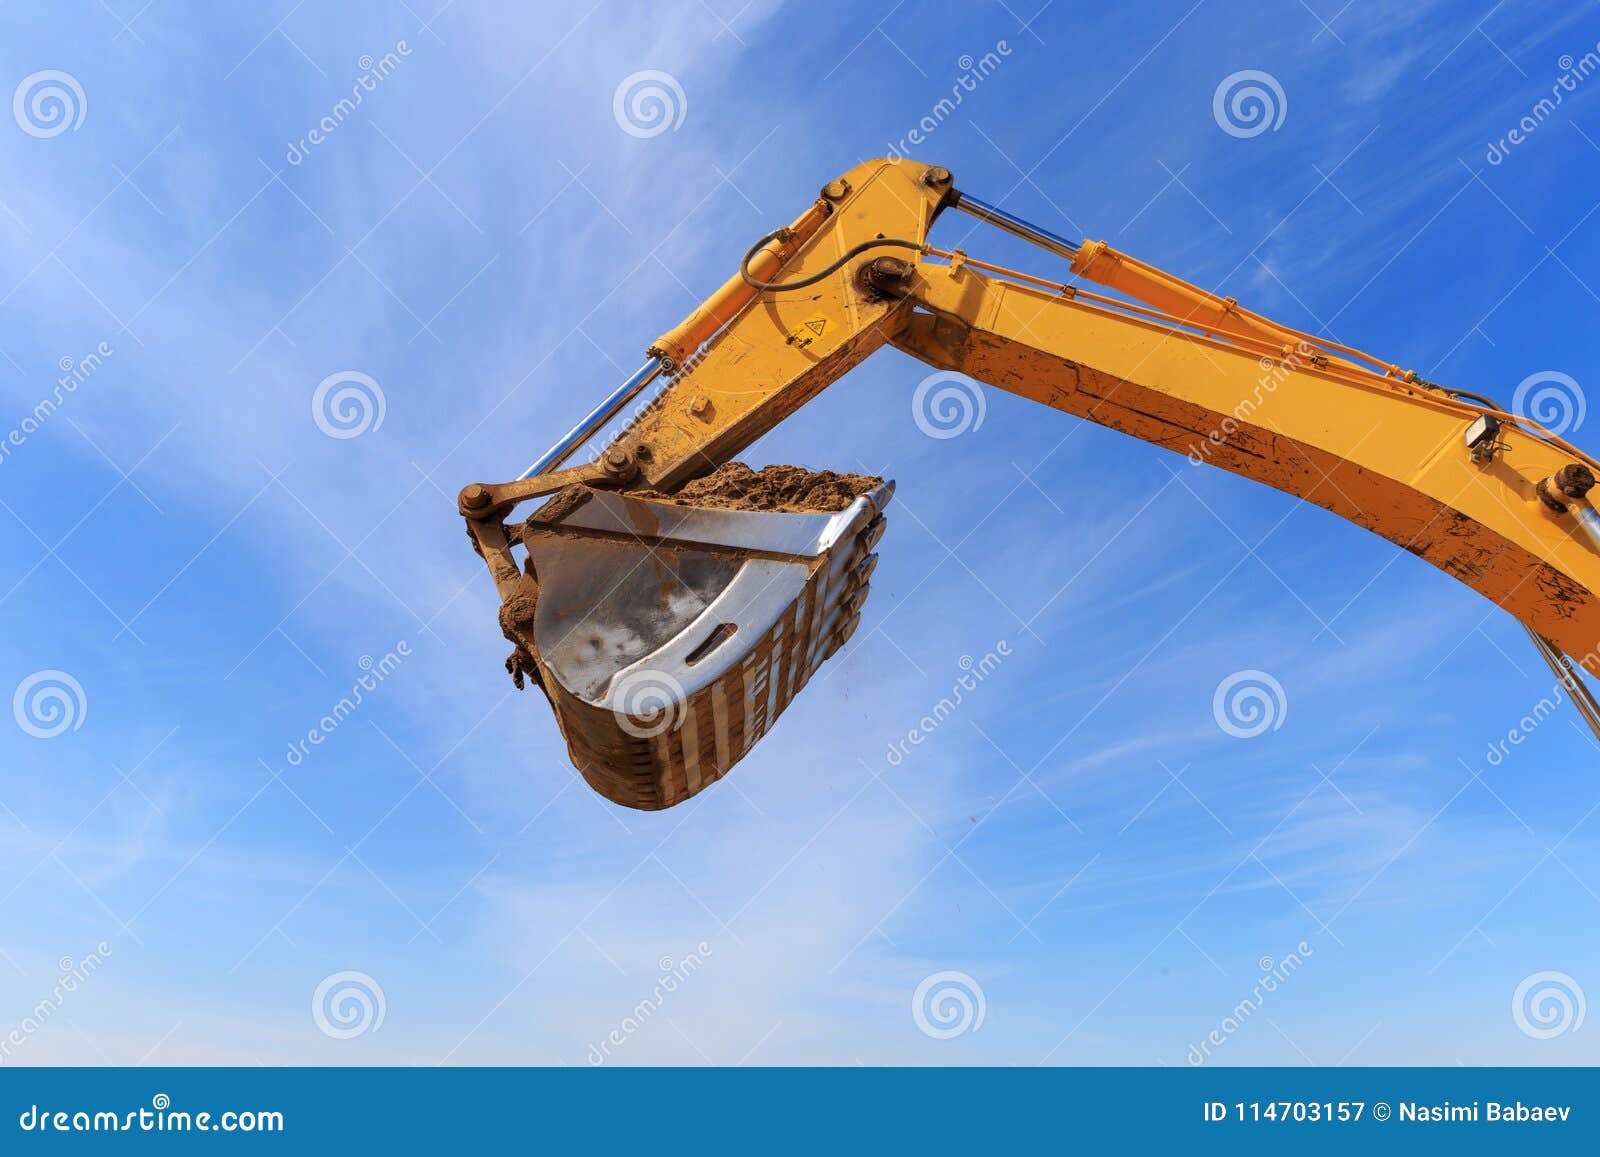 Excavator Bucket Againest the Blue Sky Stock Image - Image of blue ...